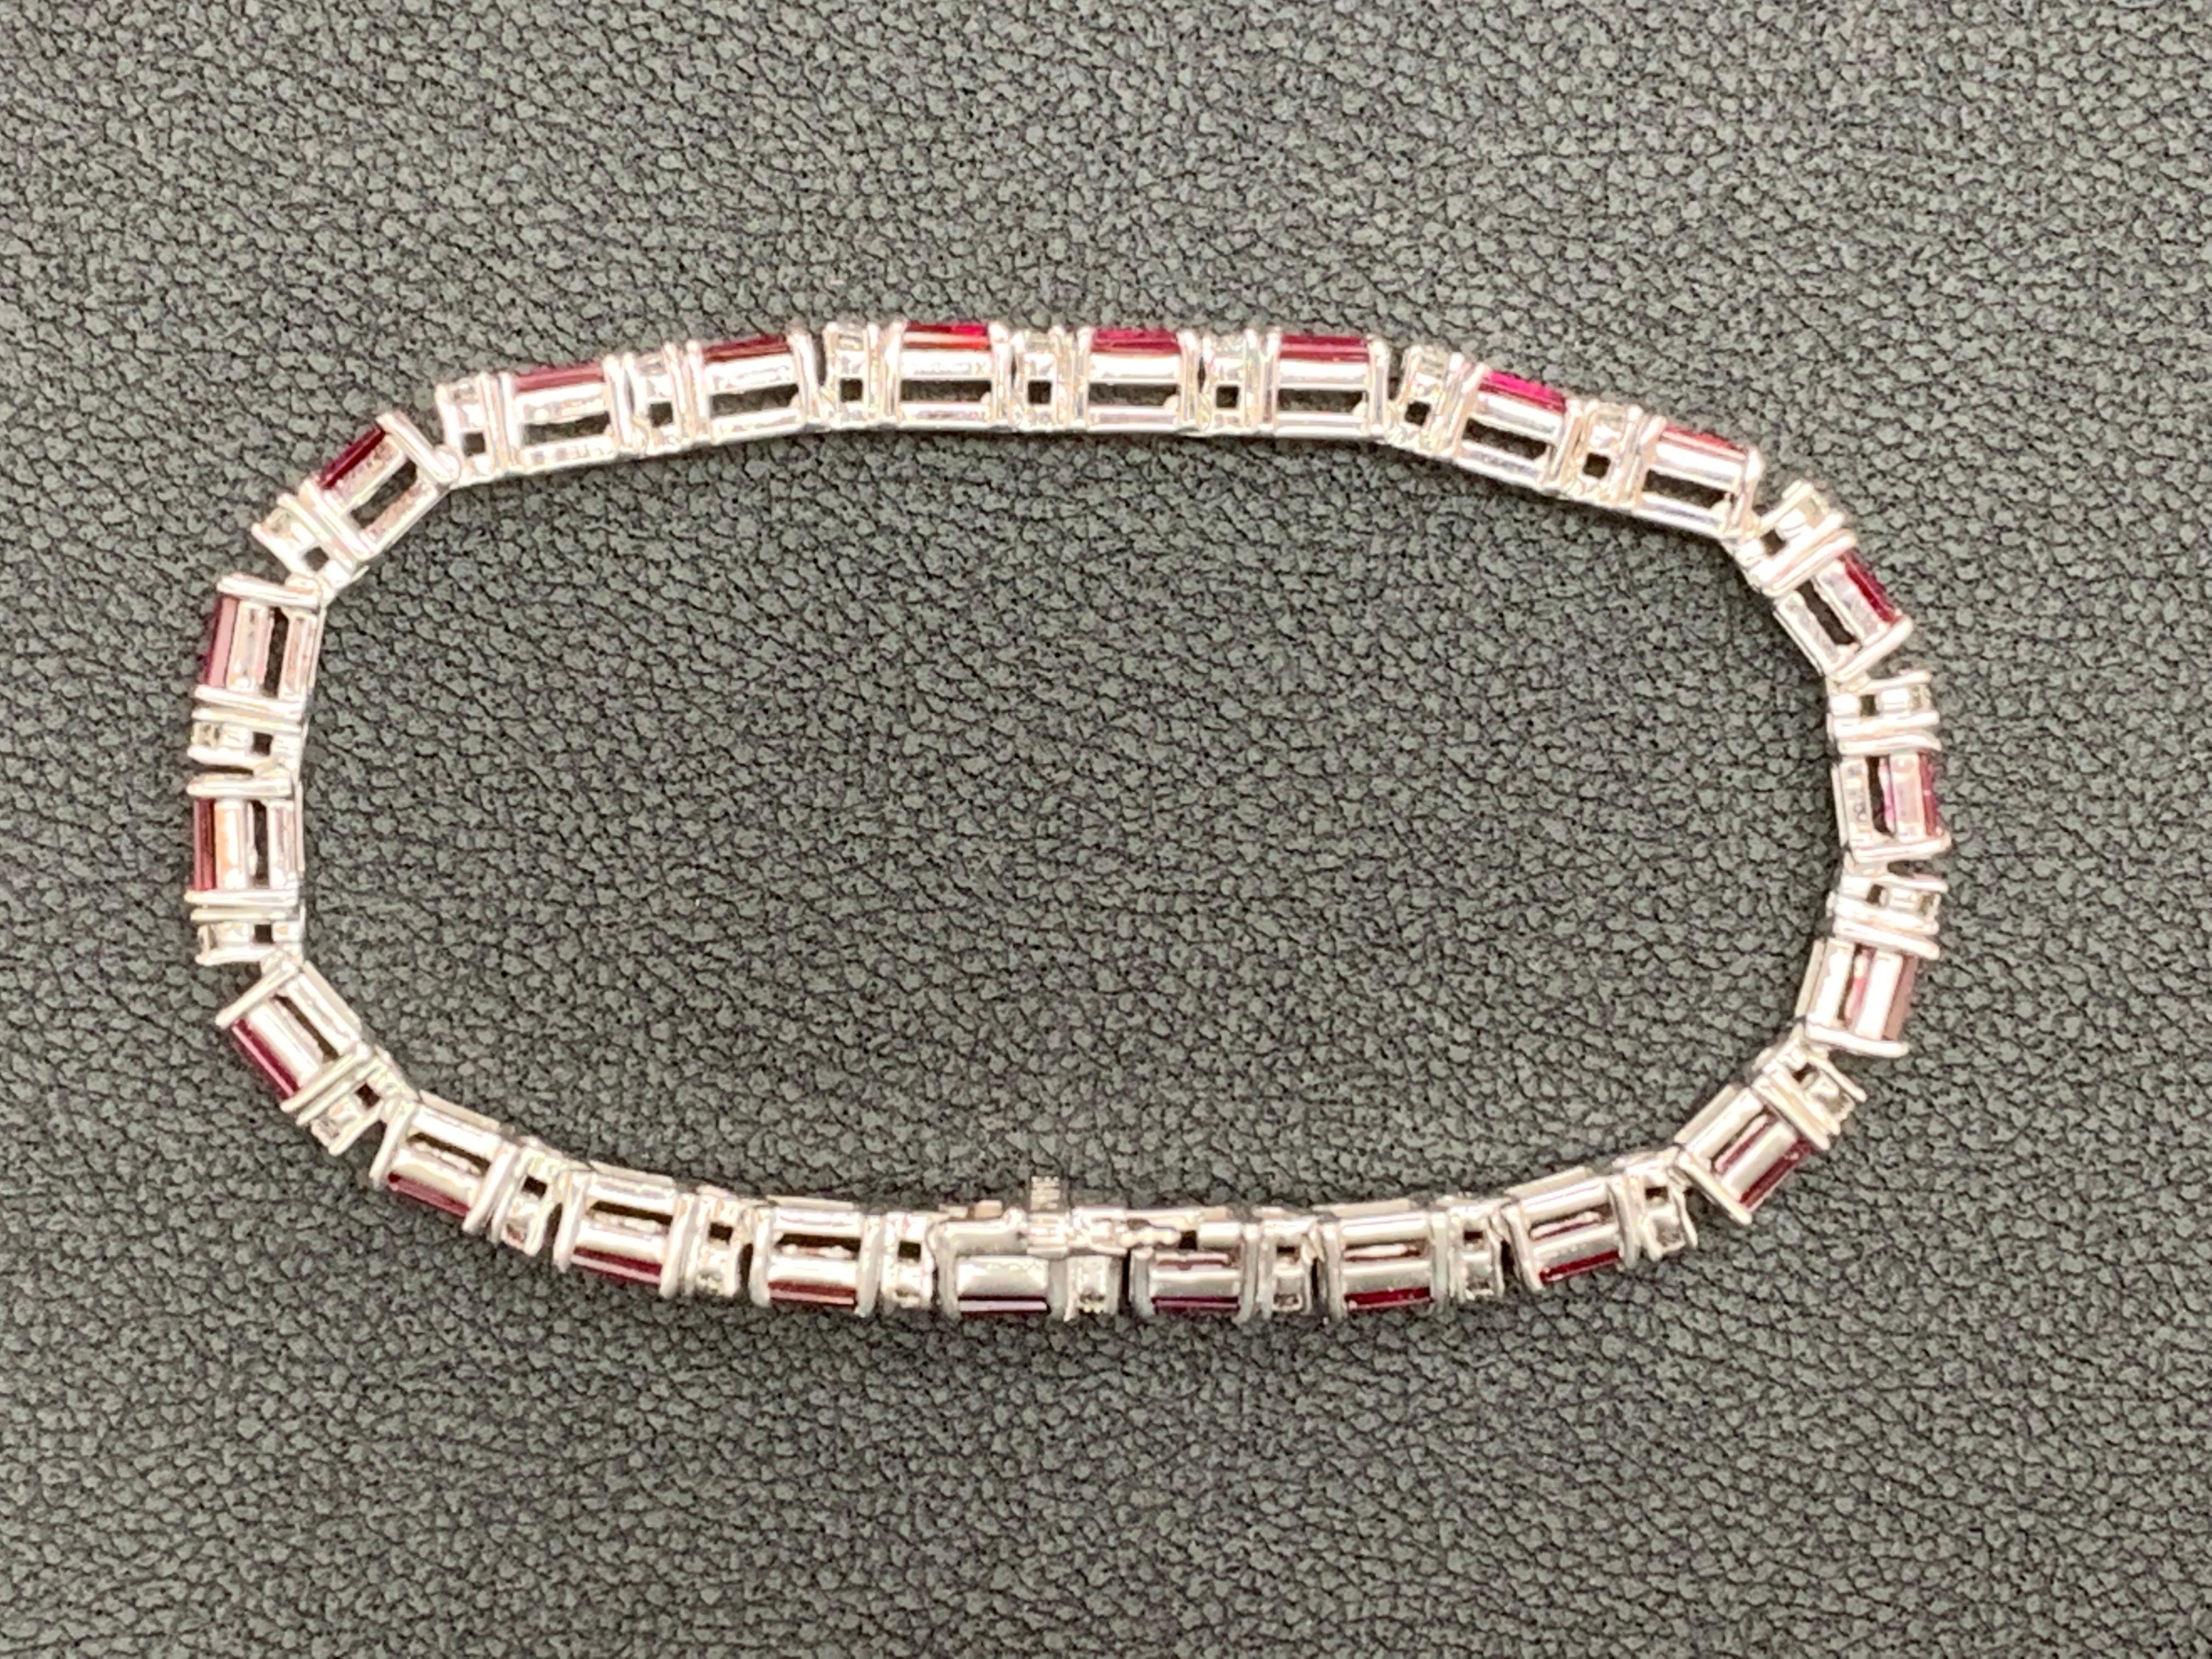 A fashionable tennis bracelet showcasing alternating emerald cut Lush 22 Rubies weighing 6.12 carats total and brilliant round 22 diamonds weighing 1 carat total. Set in a polished 14K White Gold mounting. 

Style available in different price